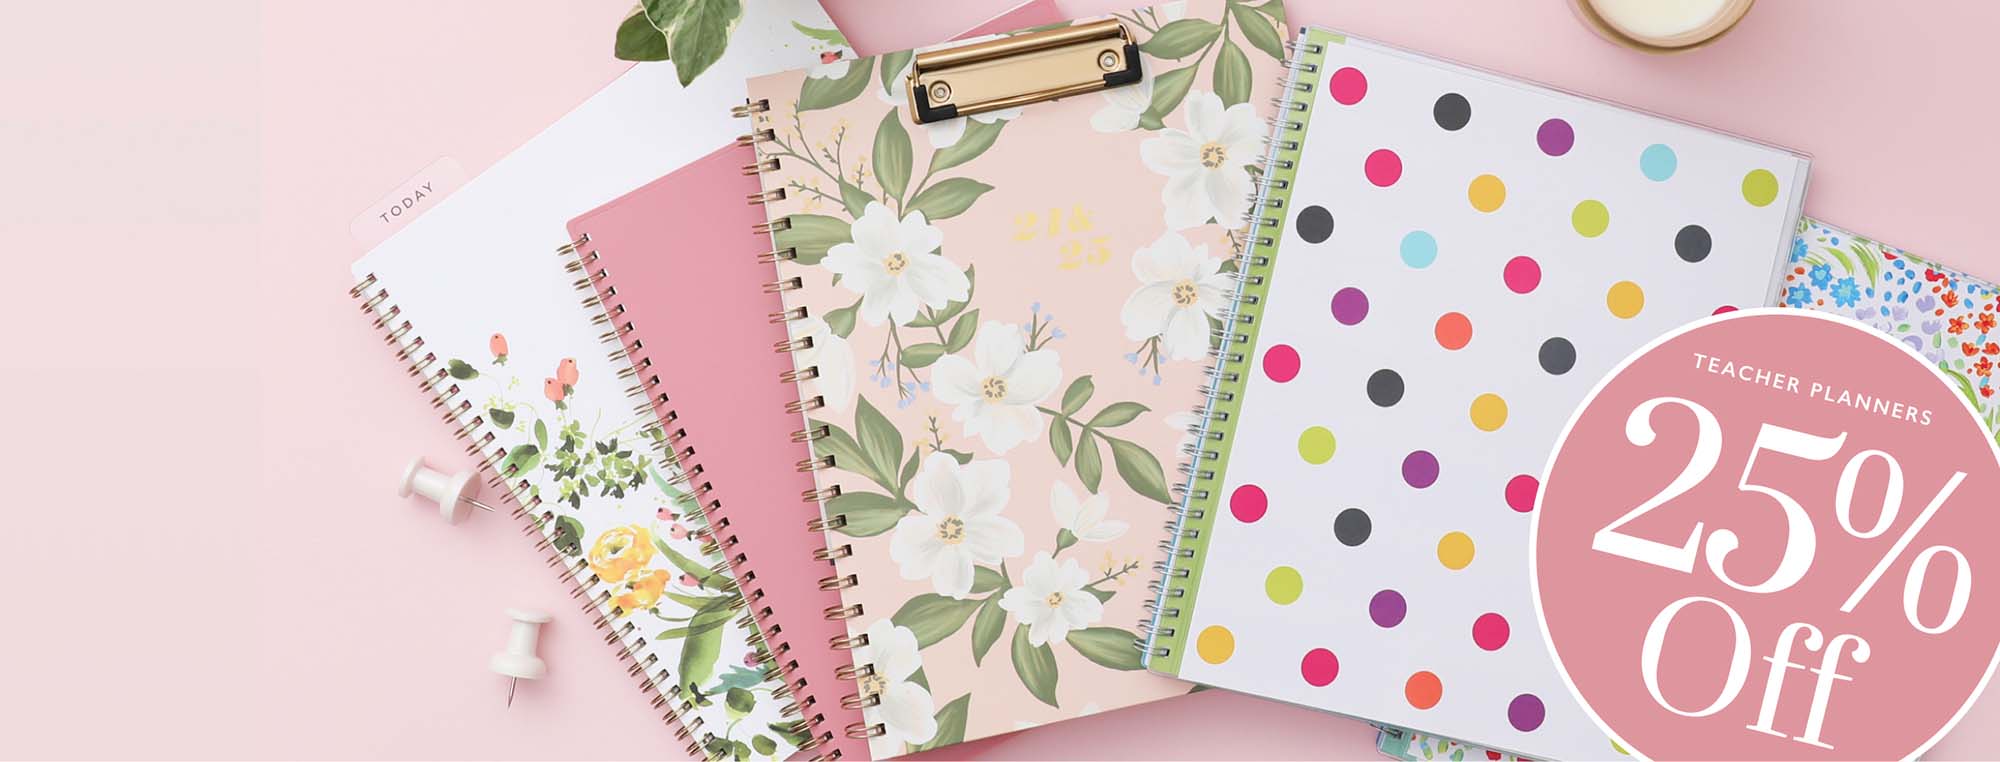 Teacher planners on sale, 25% off for Teacher Appreciation Week. Perfect for jotting down ideas or taking notes. Limited time offer!